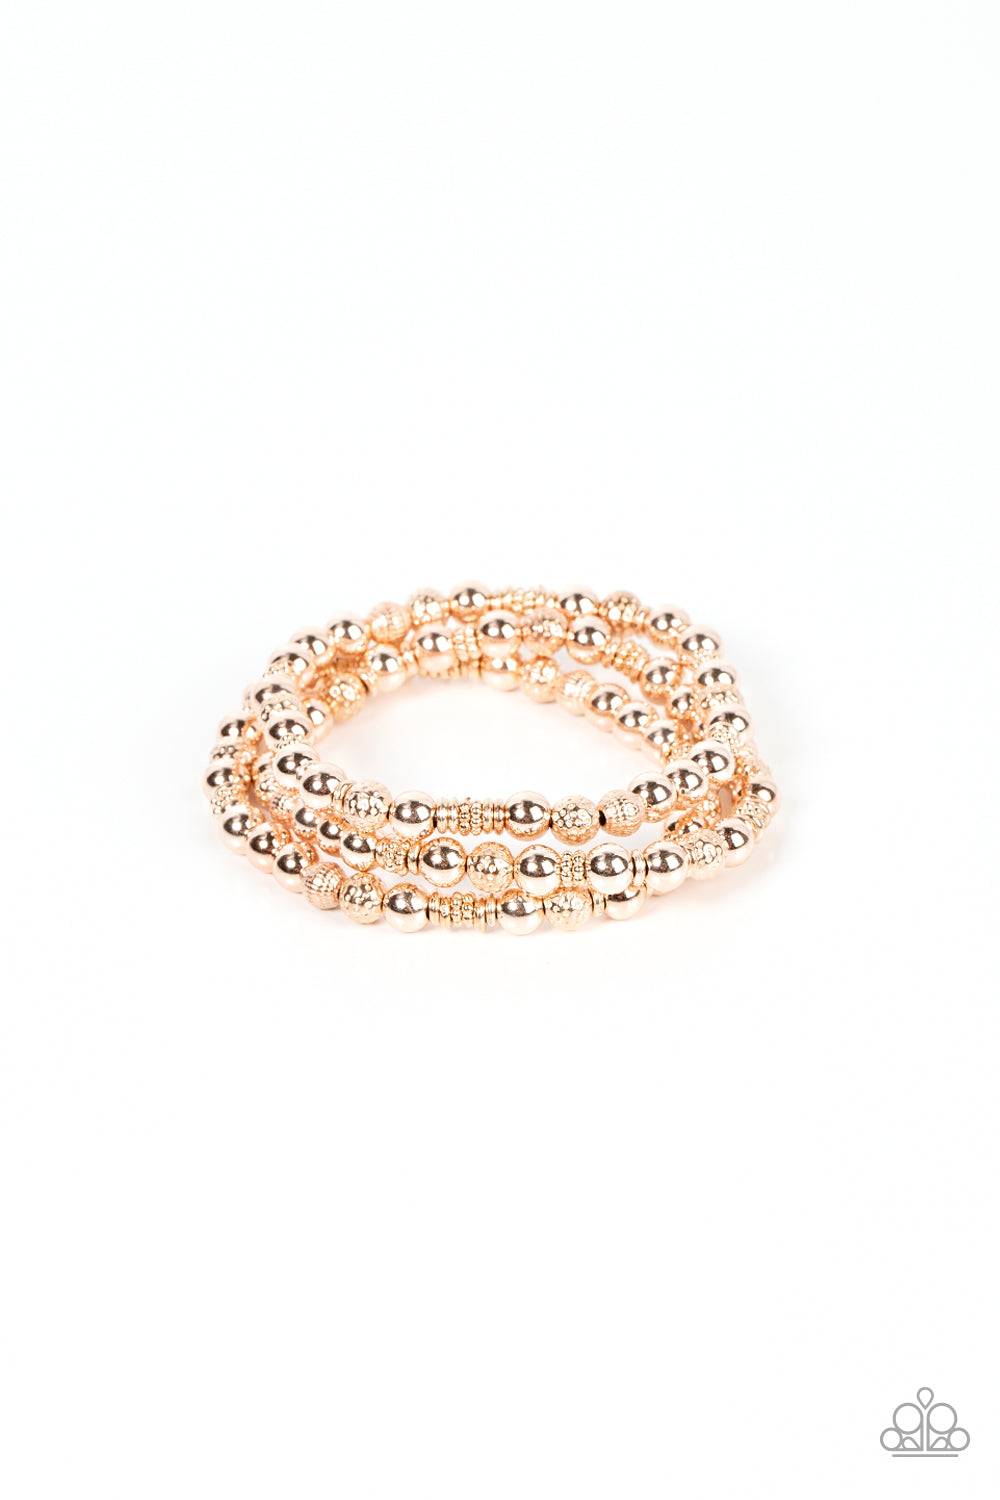 Boundless Boundaries - Rose Gold Stretchy Bracelet - Paparazzi Accessories - A shiny collection of smooth, studded, and textured rose gold beads are threaded along stretchy bands around the wrist, creating dainty layers. Sold as one set of three bracelets.